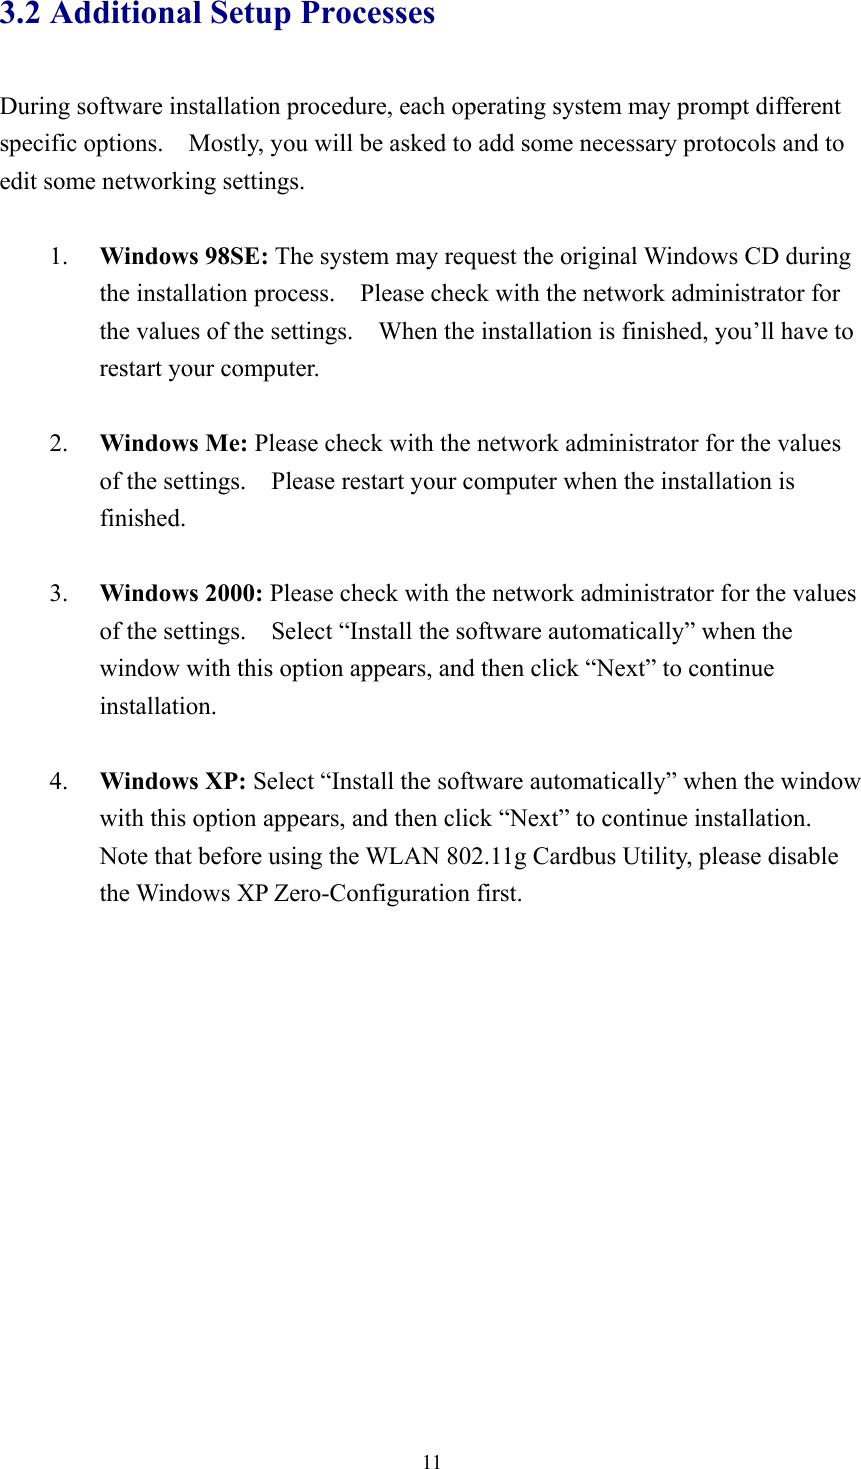  113.2 Additional Setup Processes  During software installation procedure, each operating system may prompt different specific options.    Mostly, you will be asked to add some necessary protocols and to edit some networking settings.  1.  Windows 98SE: The system may request the original Windows CD during the installation process.    Please check with the network administrator for the values of the settings.    When the installation is finished, you’ll have to restart your computer.  2.  Windows Me: Please check with the network administrator for the values of the settings.    Please restart your computer when the installation is finished.  3.  Windows 2000: Please check with the network administrator for the values of the settings.  Select “Install the software automatically” when the window with this option appears, and then click “Next” to continue installation.  4.  Windows XP: Select “Install the software automatically” when the window with this option appears, and then click “Next” to continue installation.   Note that before using the WLAN 802.11g Cardbus Utility, please disable the Windows XP Zero-Configuration first.  